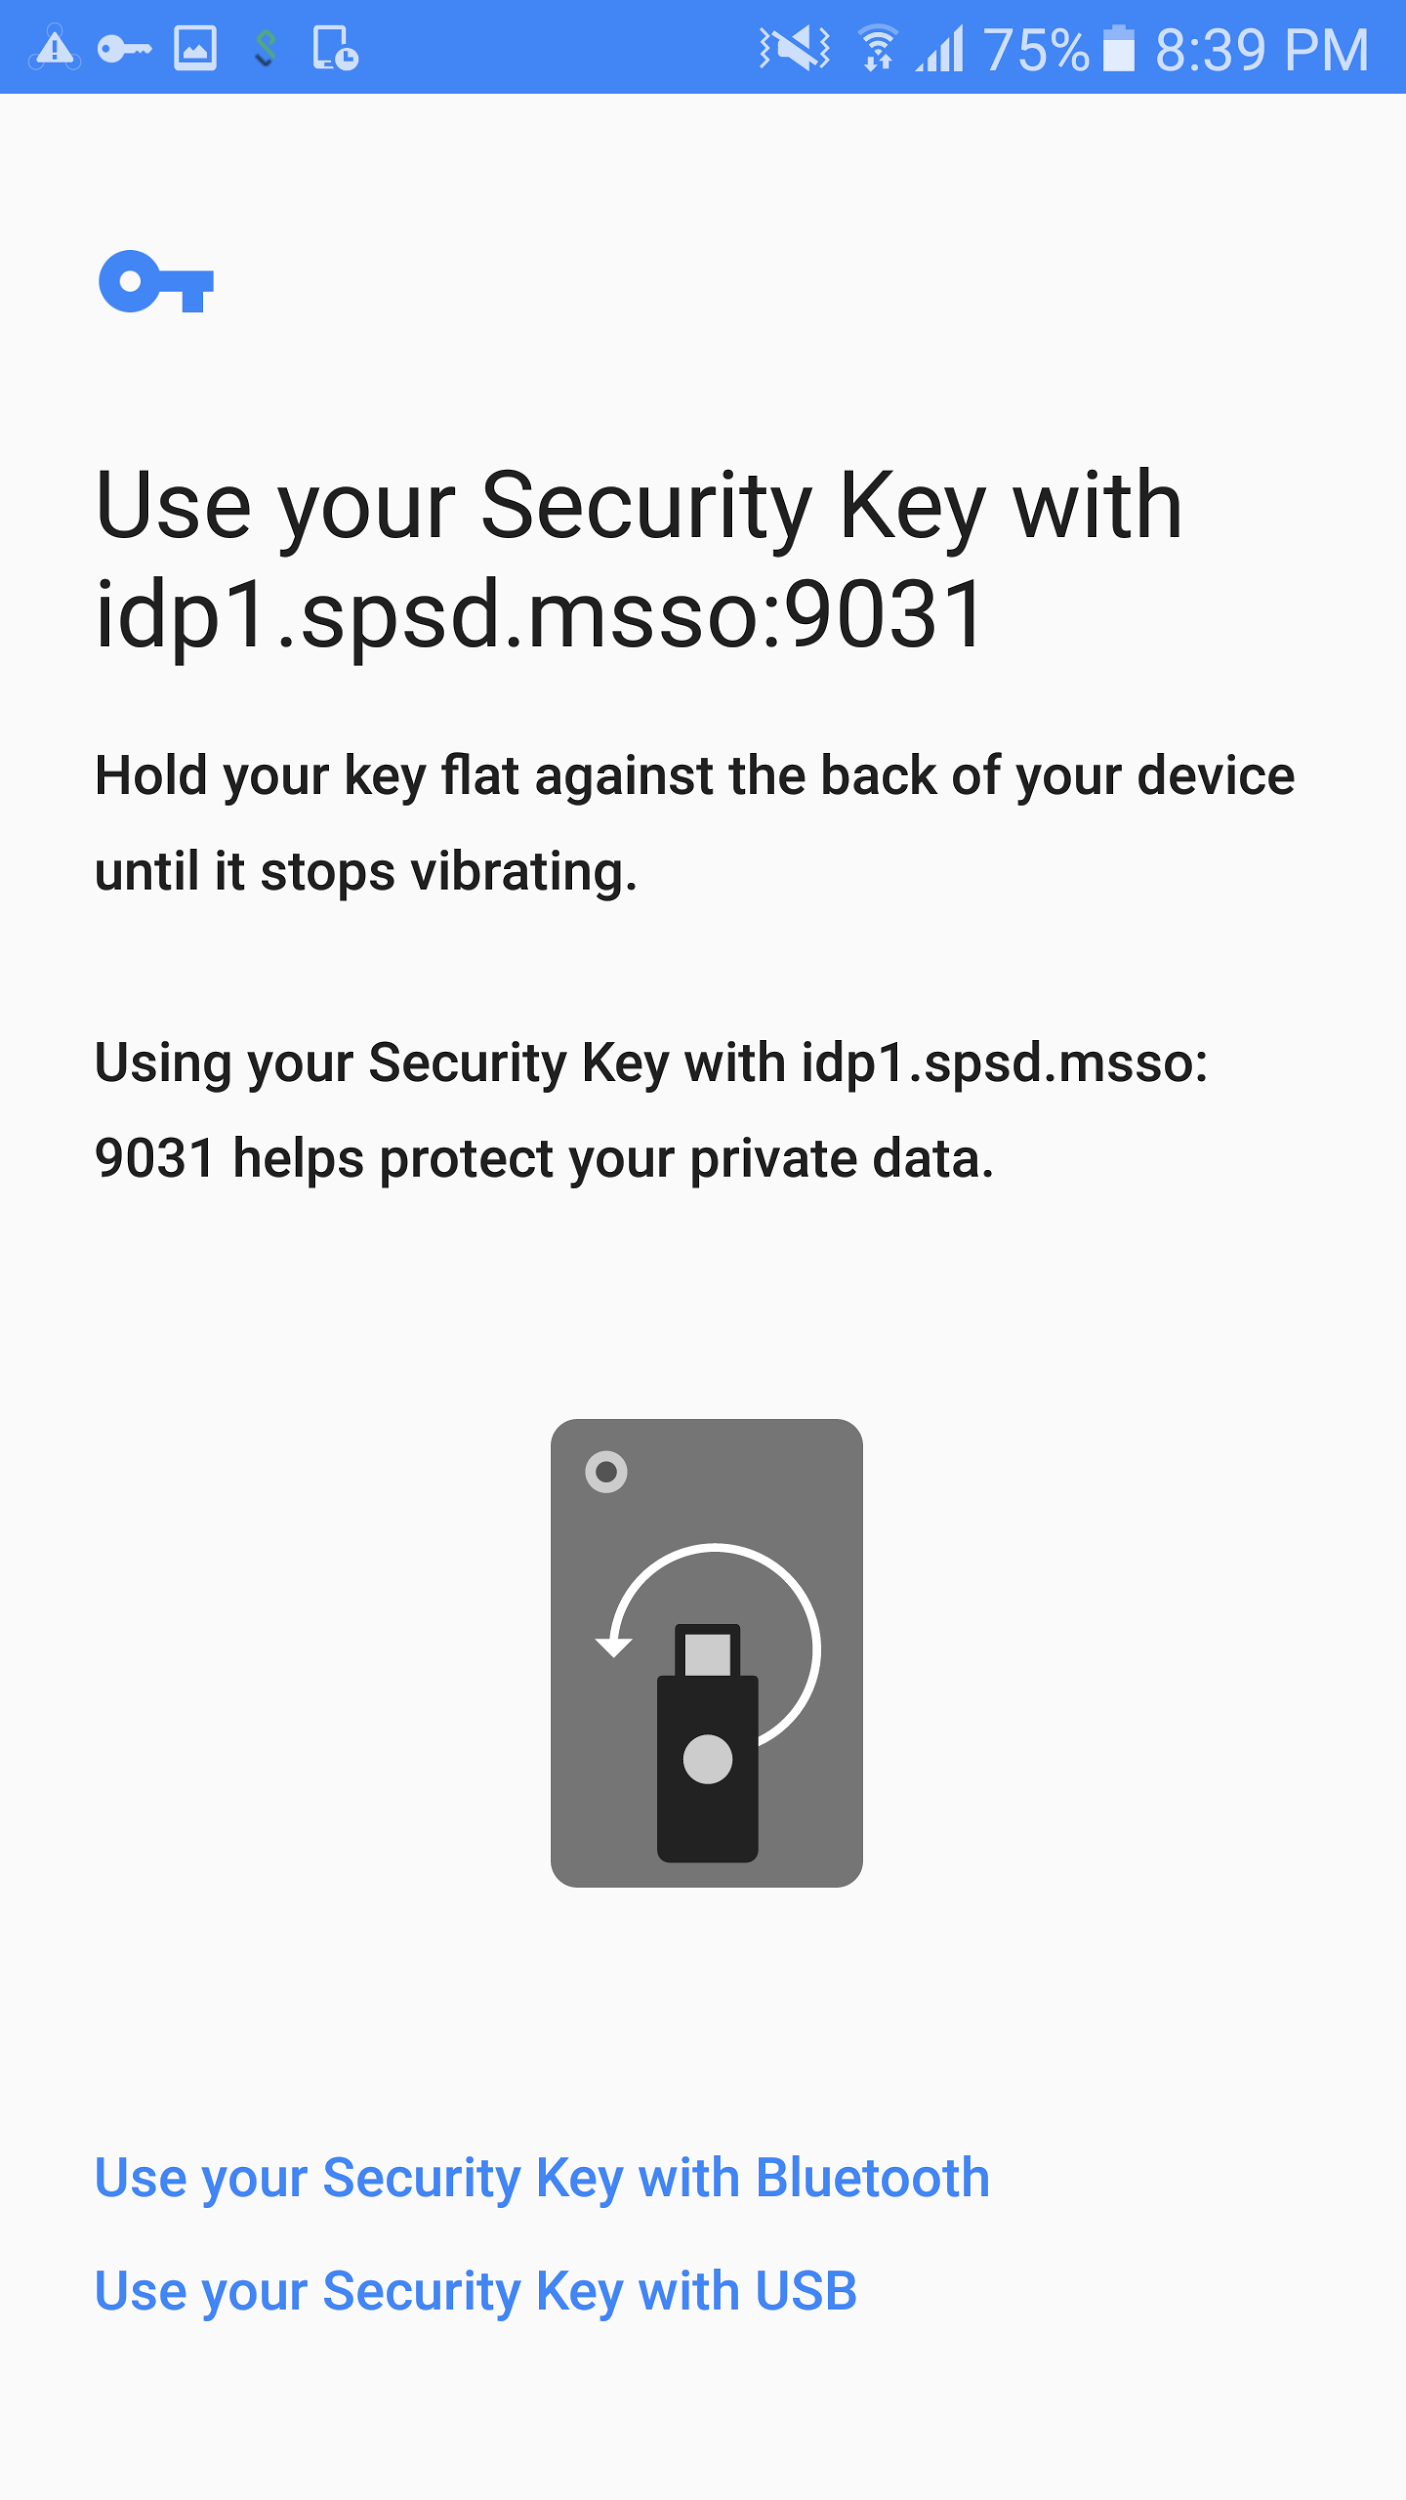 The right side of the figure depicts the Google Authenticator application directing the user to use their FIDO Security Key.